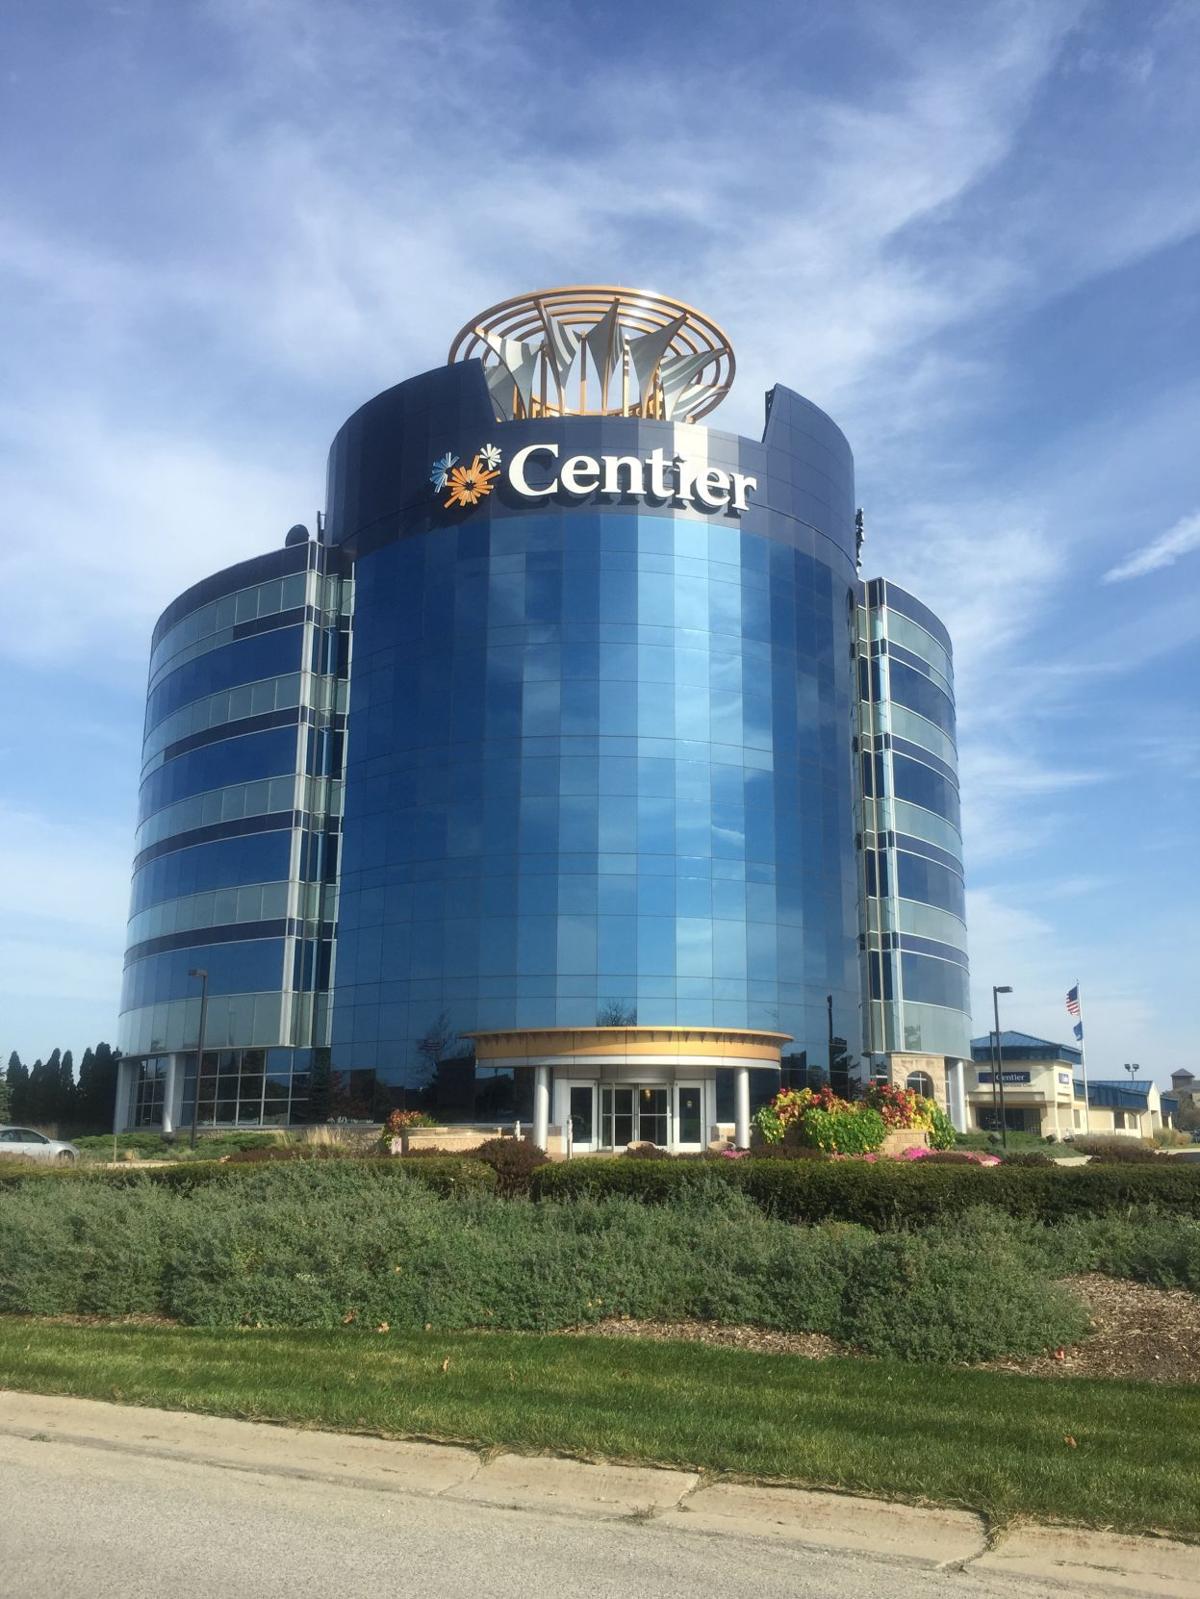 Centier named 'bank of the year' for Community Business Lending in 2017